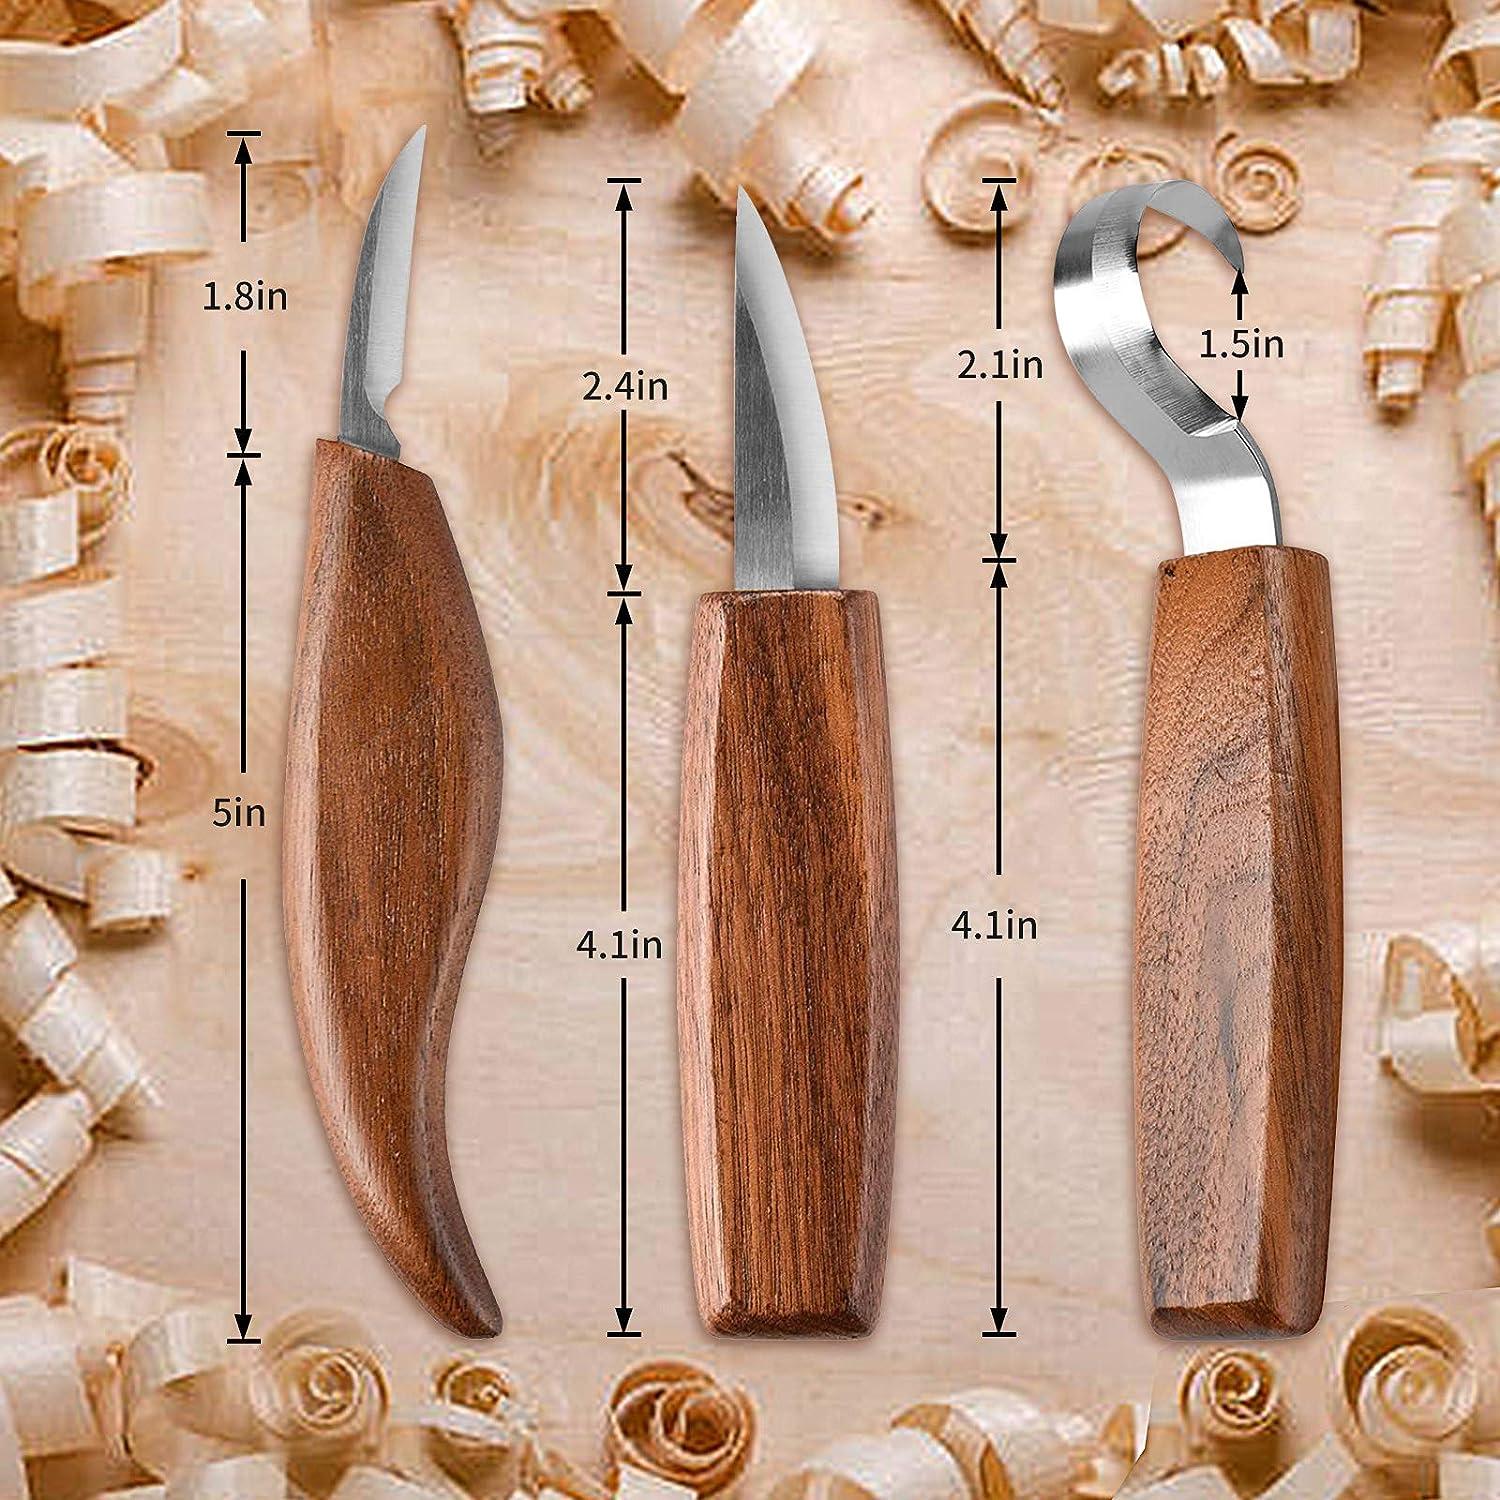 Olerqzer Wood Carving Tools for Beginners 12-in-1 Wood Carving Kit with  Carving Hook Knife Whittling Knife Chip Carving Knife Gloves Carving Knife  Sharpener for Spoon Bowl Kuksa Cup (Style 1) Brown1